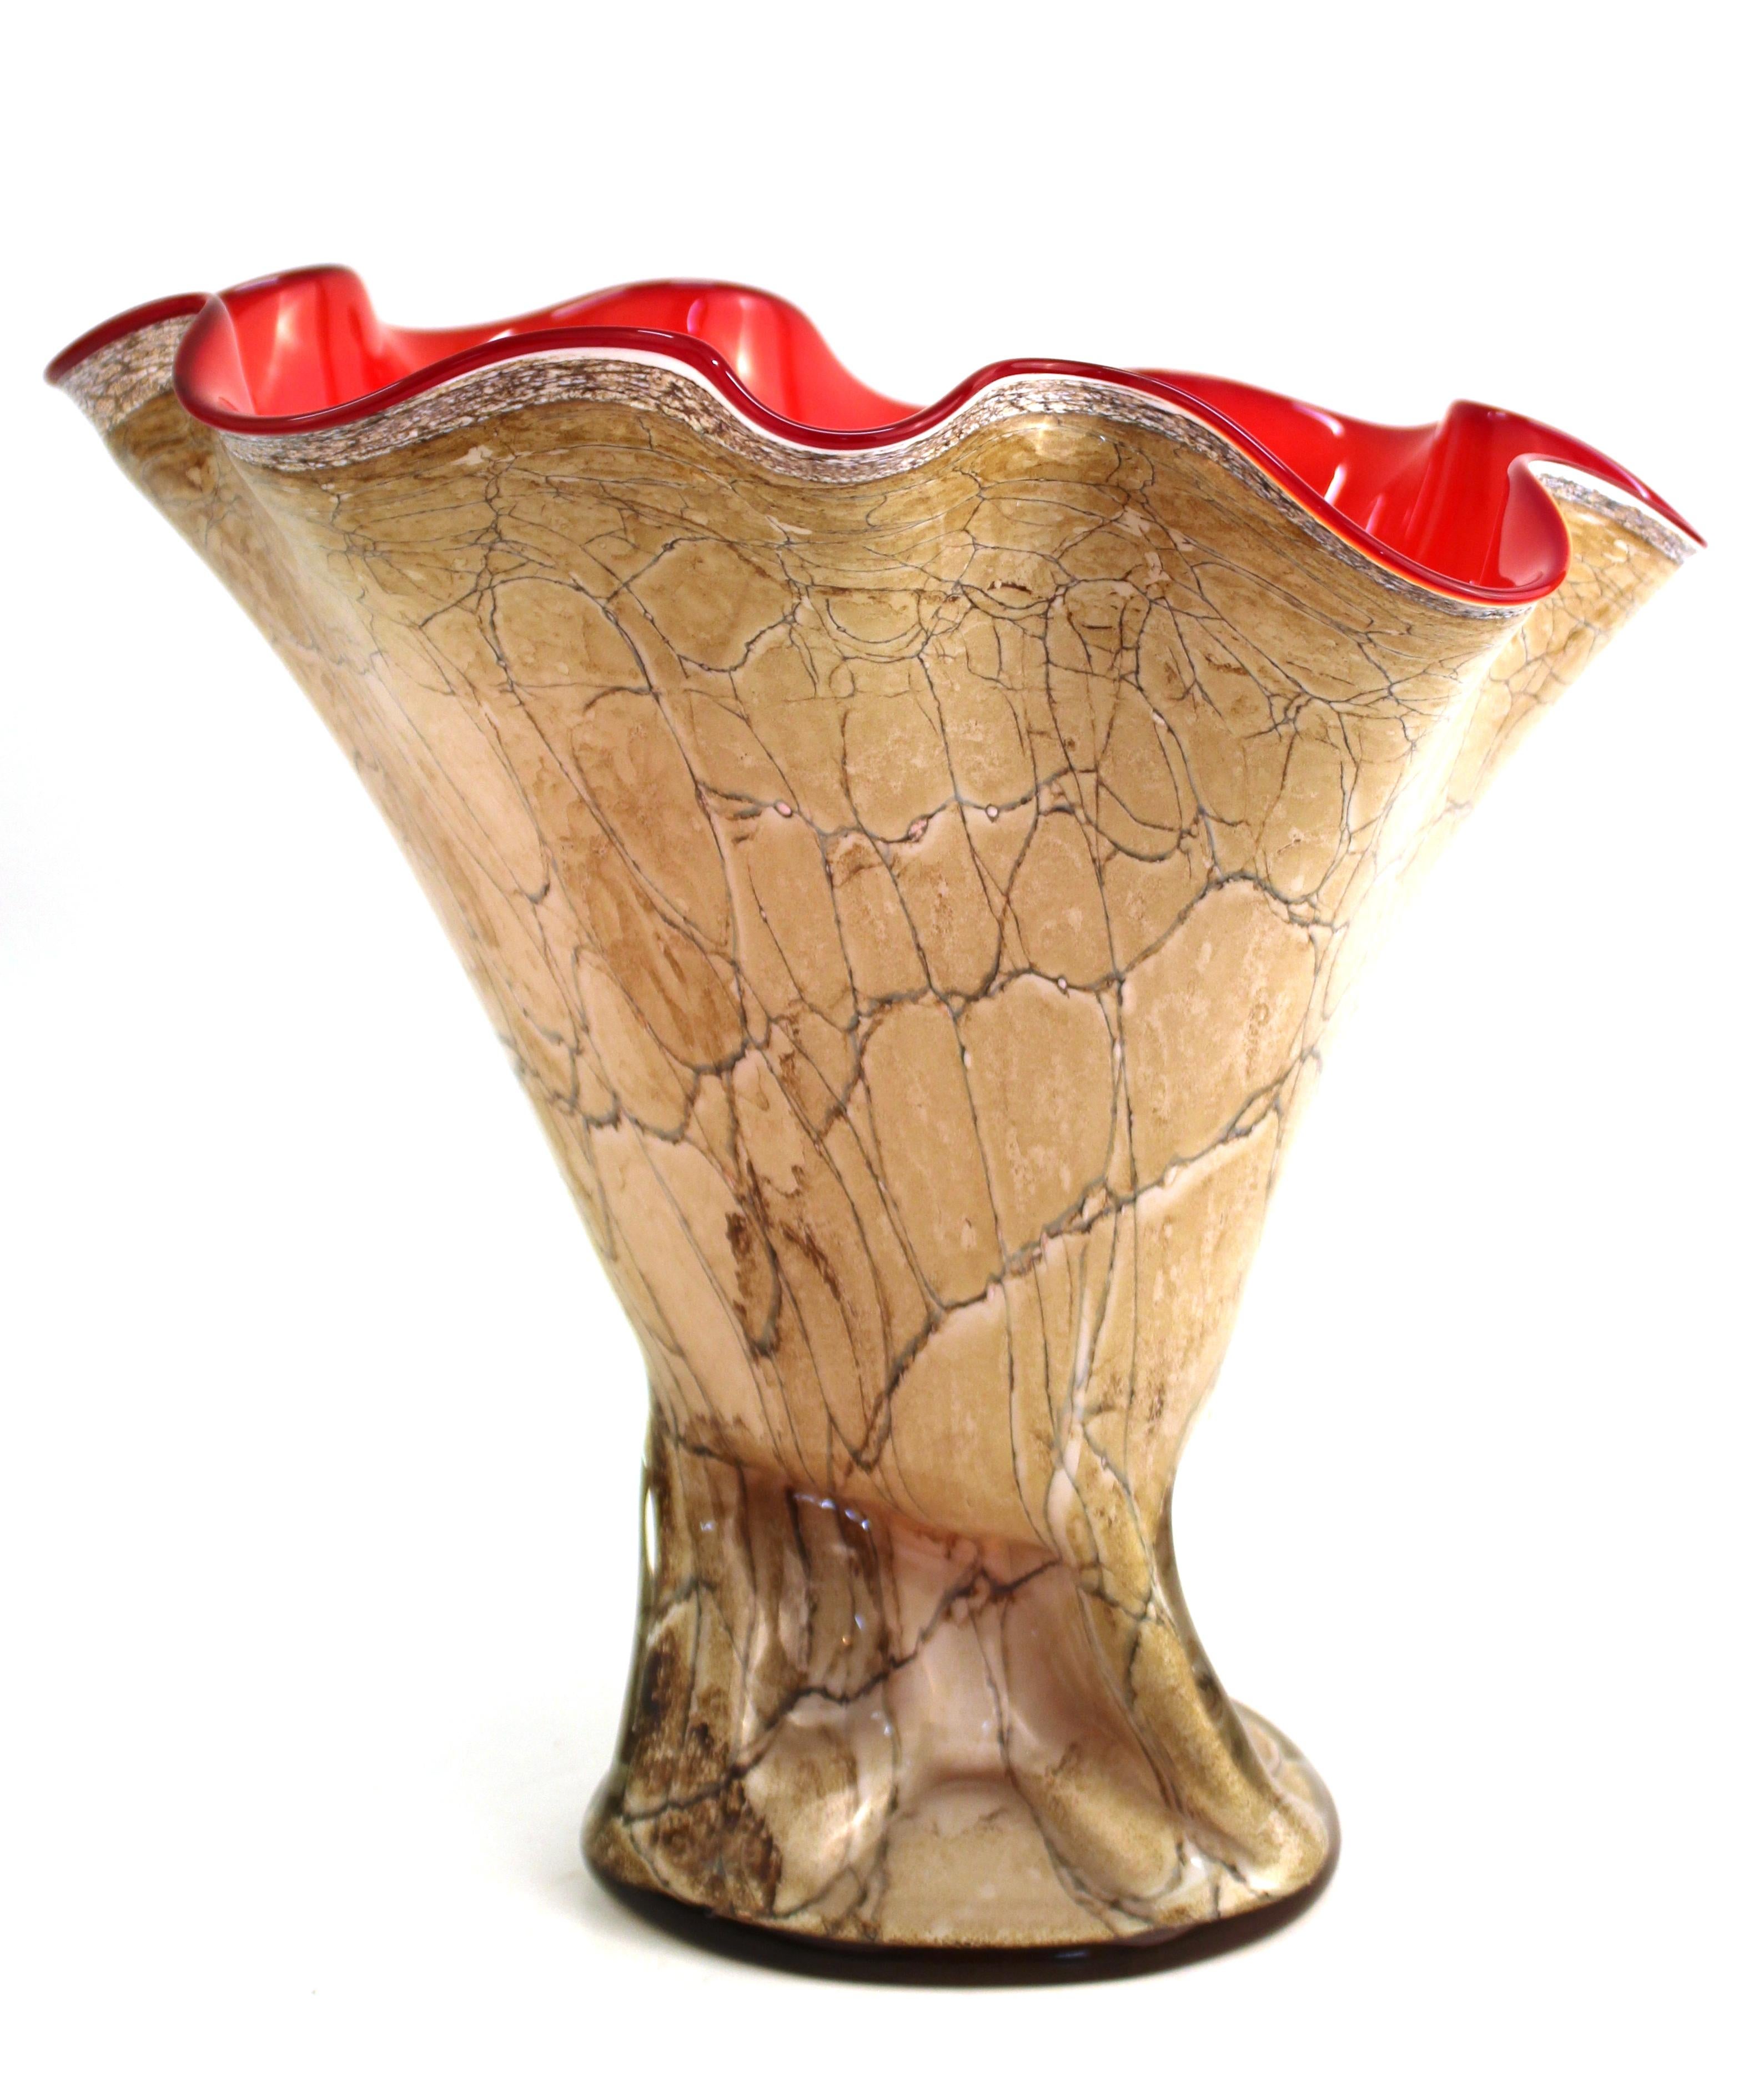 Italian Modern studio art glass centerpiece bowl or vase in handkerchief form, designed with marbled glass exterior. The piece has a red interior and was likely made in Murano in the late 20th century. In great vintage condition with age-appropriate